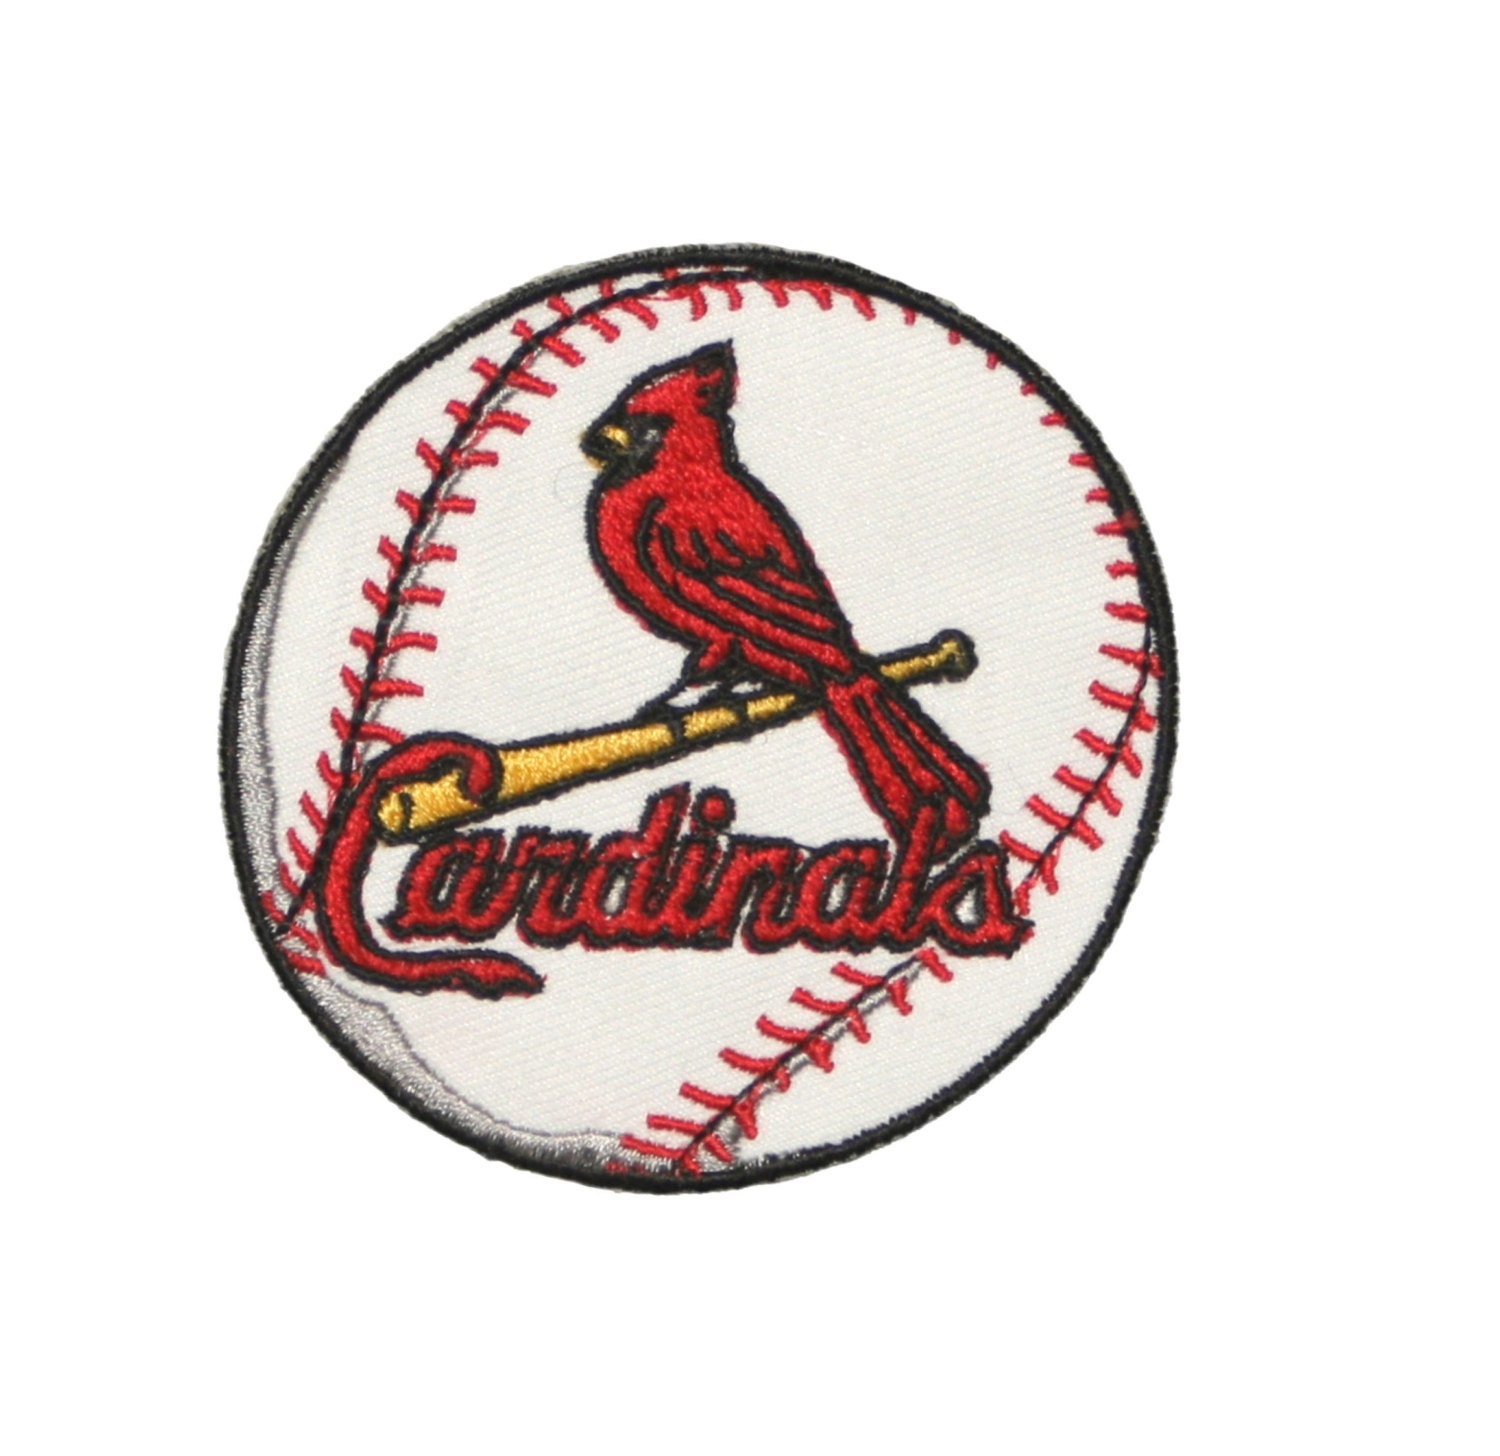 St Louis Cardinals Baseball MLB Iron On Patch Embroidered Team